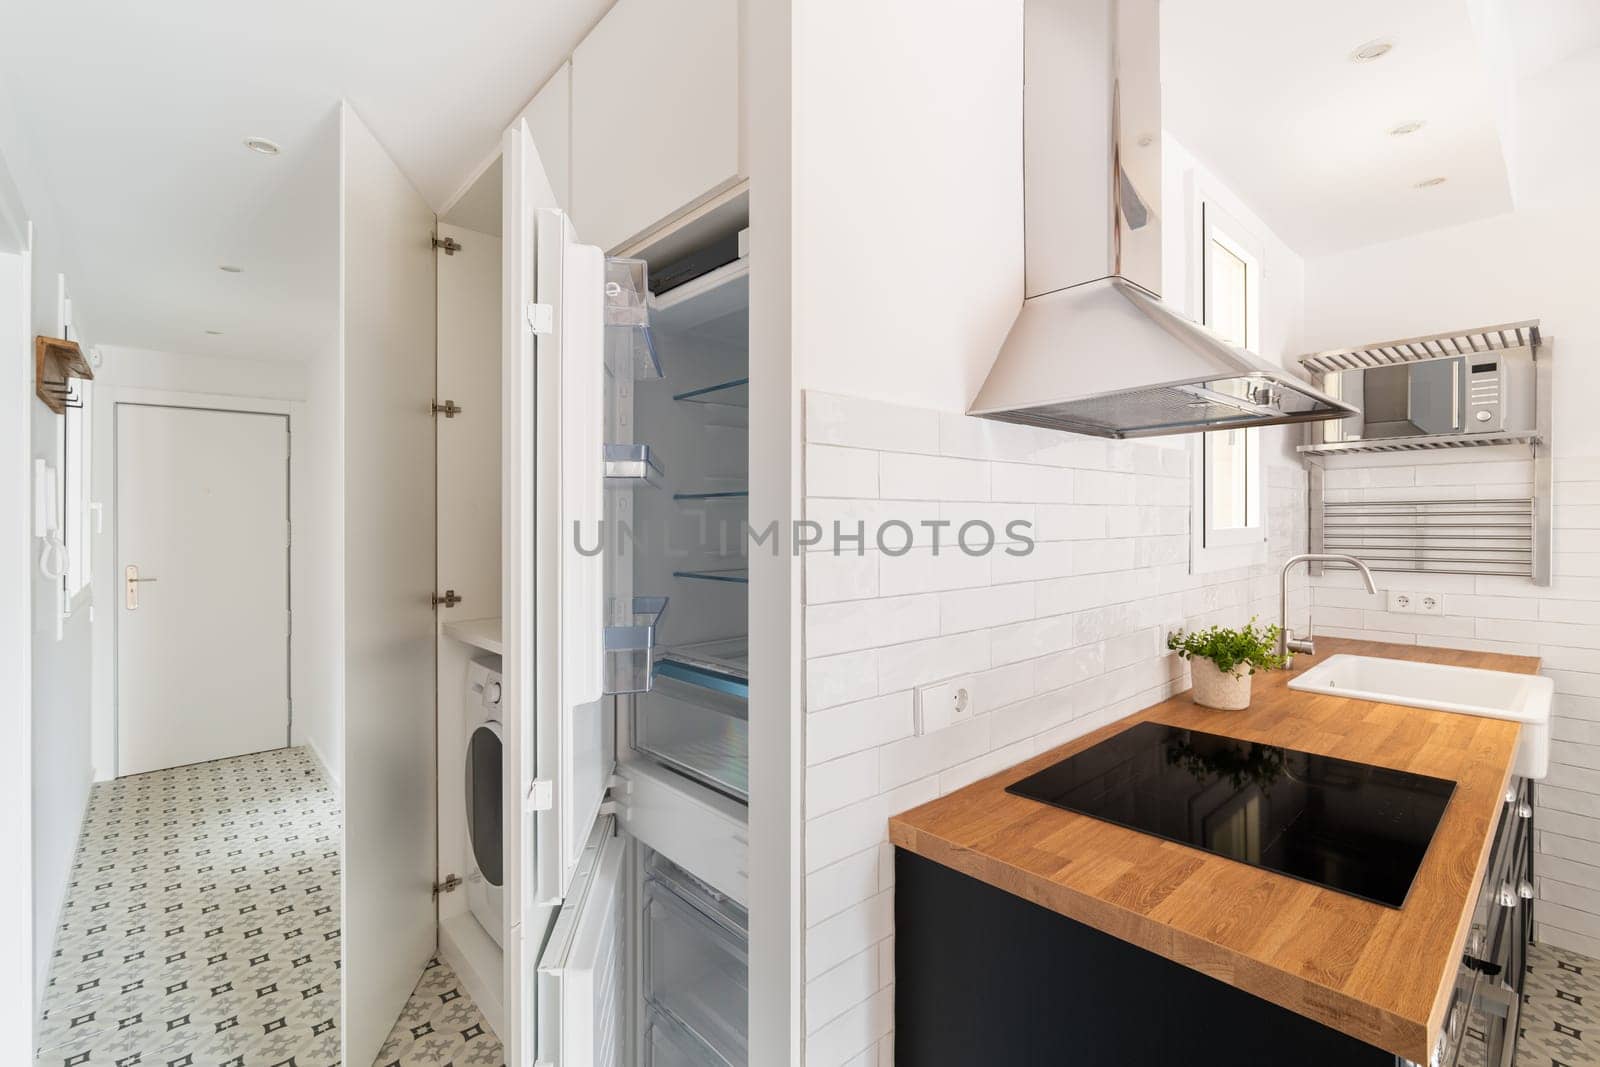 View of the kitchen and corridor with a washing machine and a built-in refrigerator compact but comfortable apartment in a new building. Mortgage house for a young family.